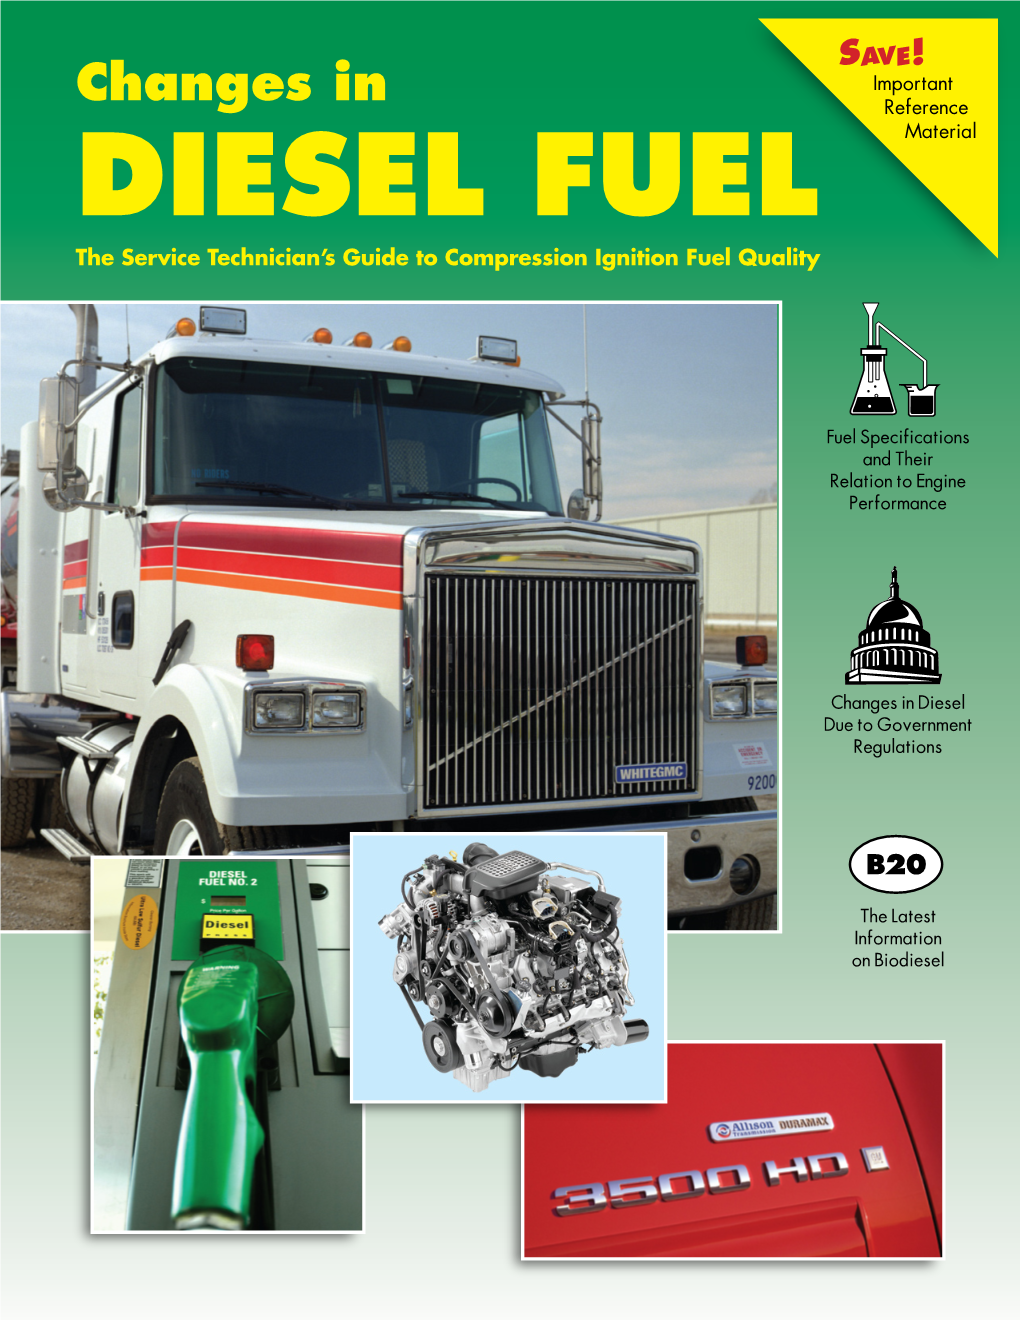 Diesel Fuel the Service Technician’S Guide to Compression Ignition Fuel Quality